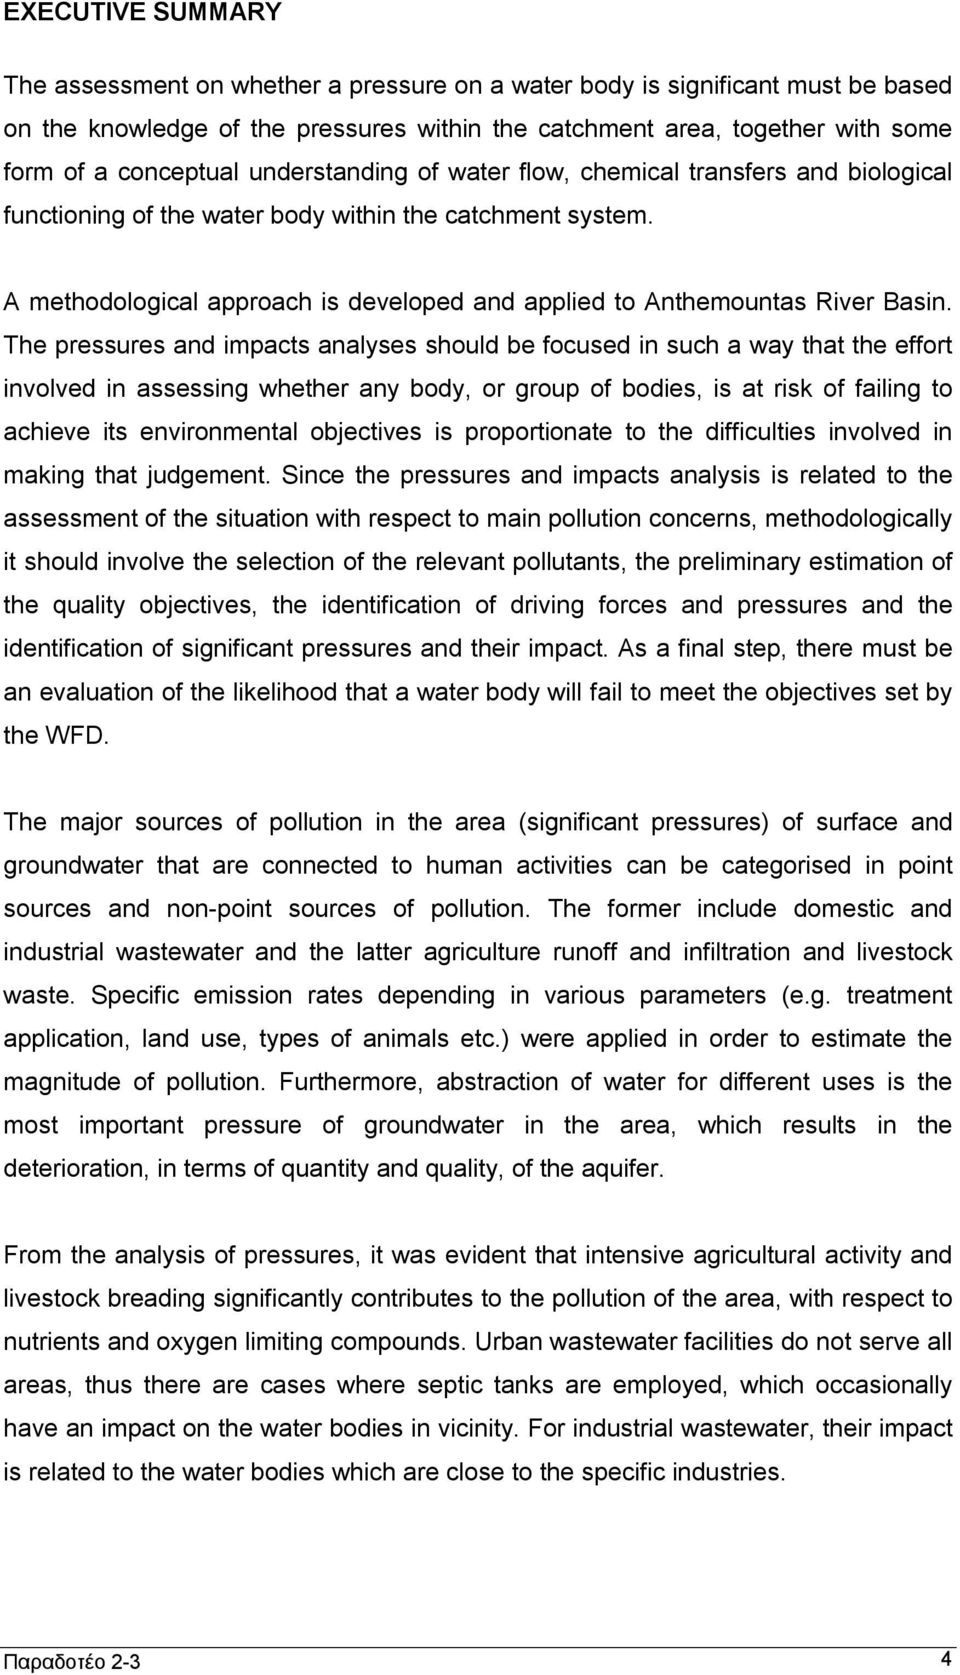 A methodological approach is developed and applied to Anthemountas River Basin.